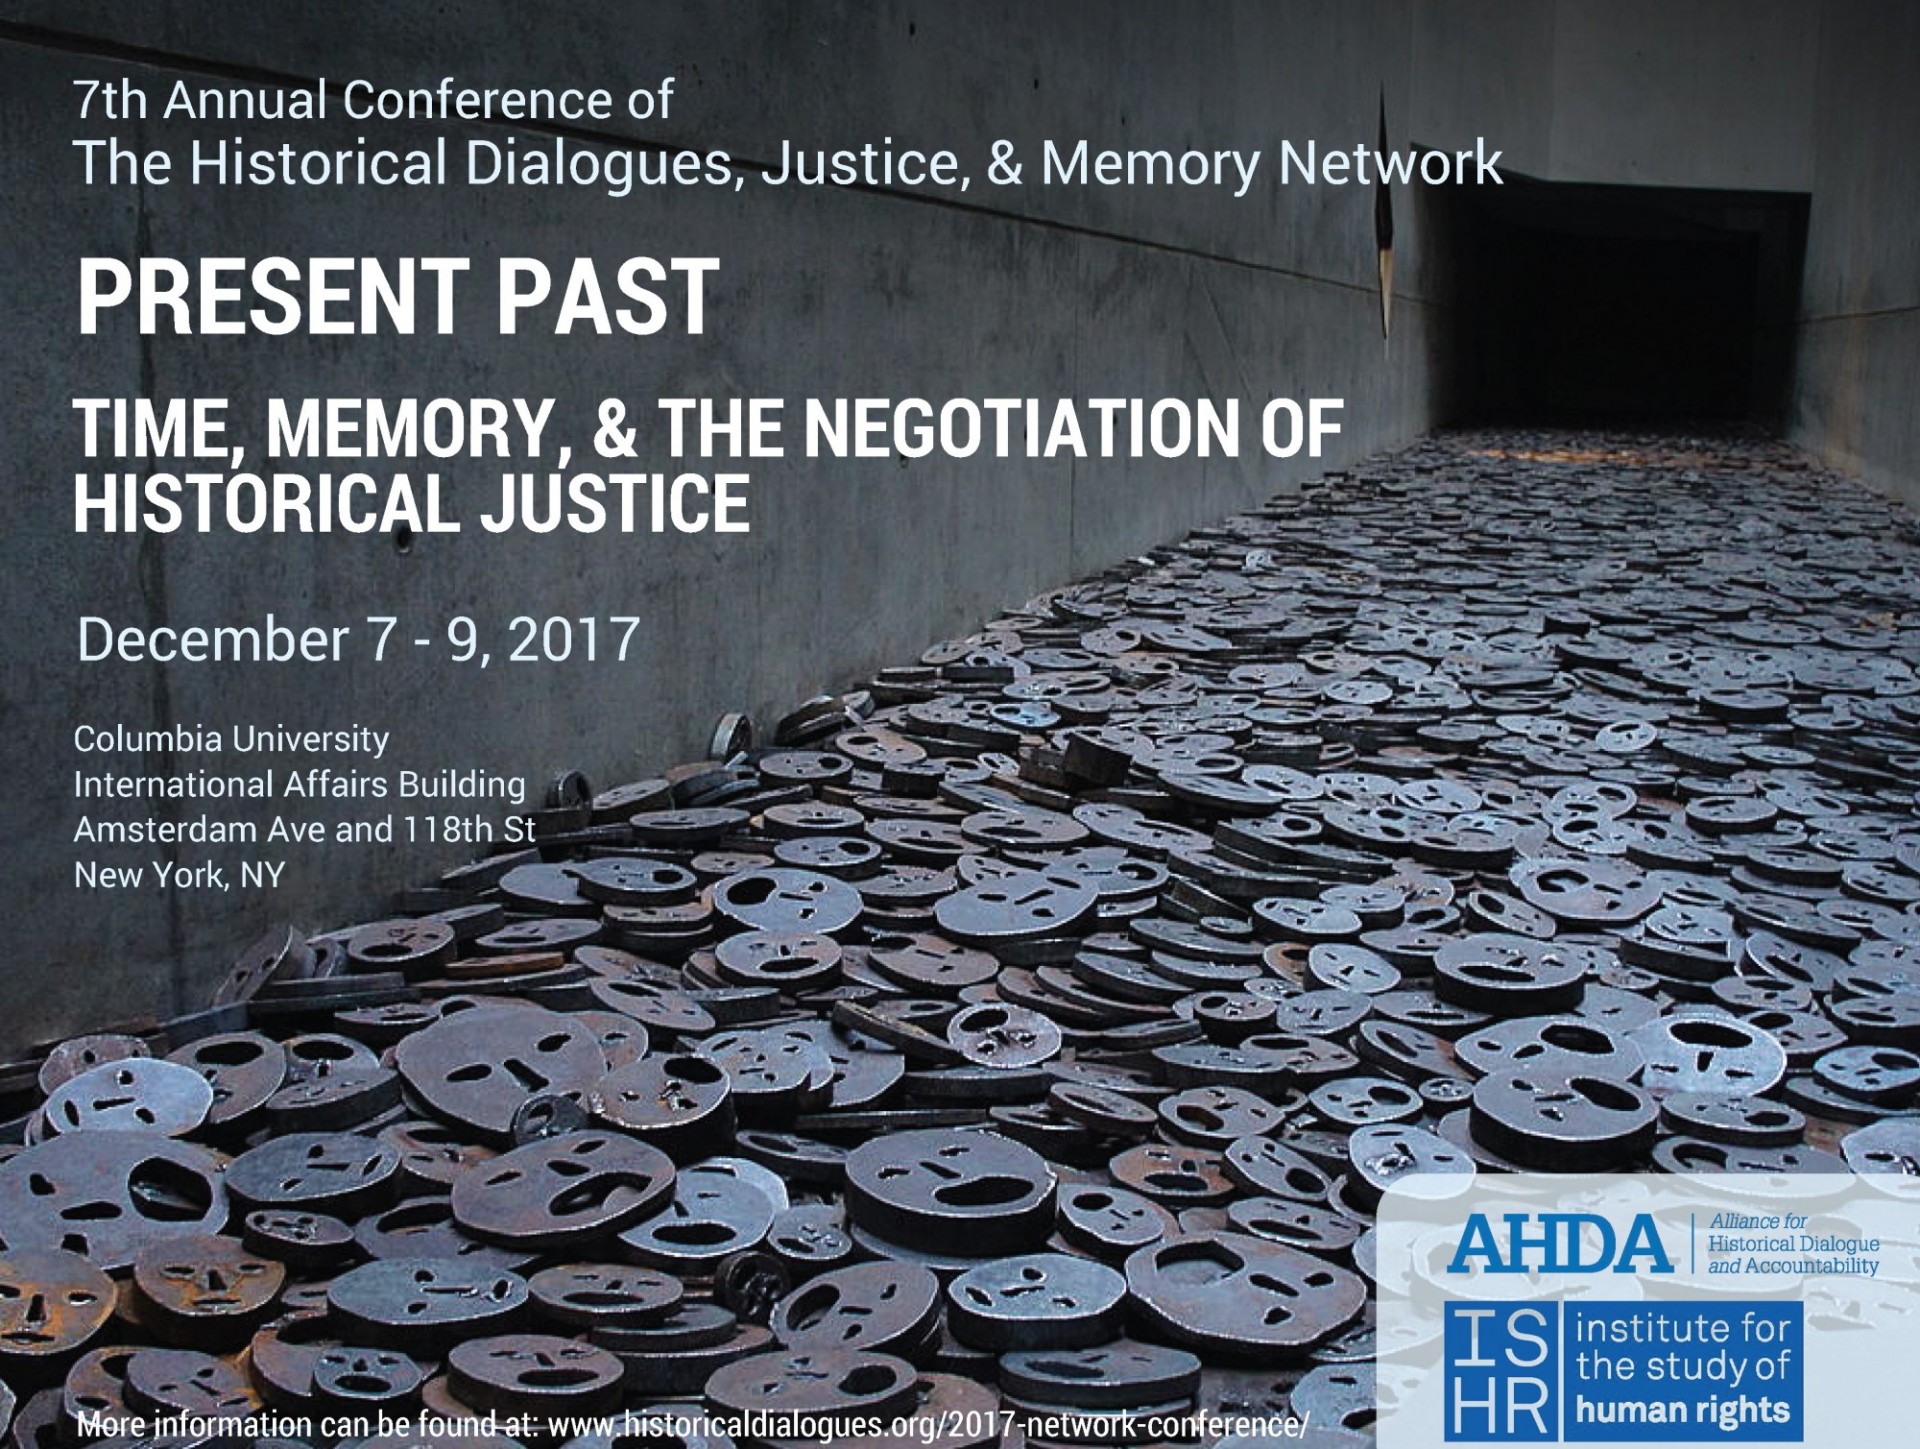 Flyer for conference "Present Past: Time, Memory, and the Negotiation of Historical Justice" with event details